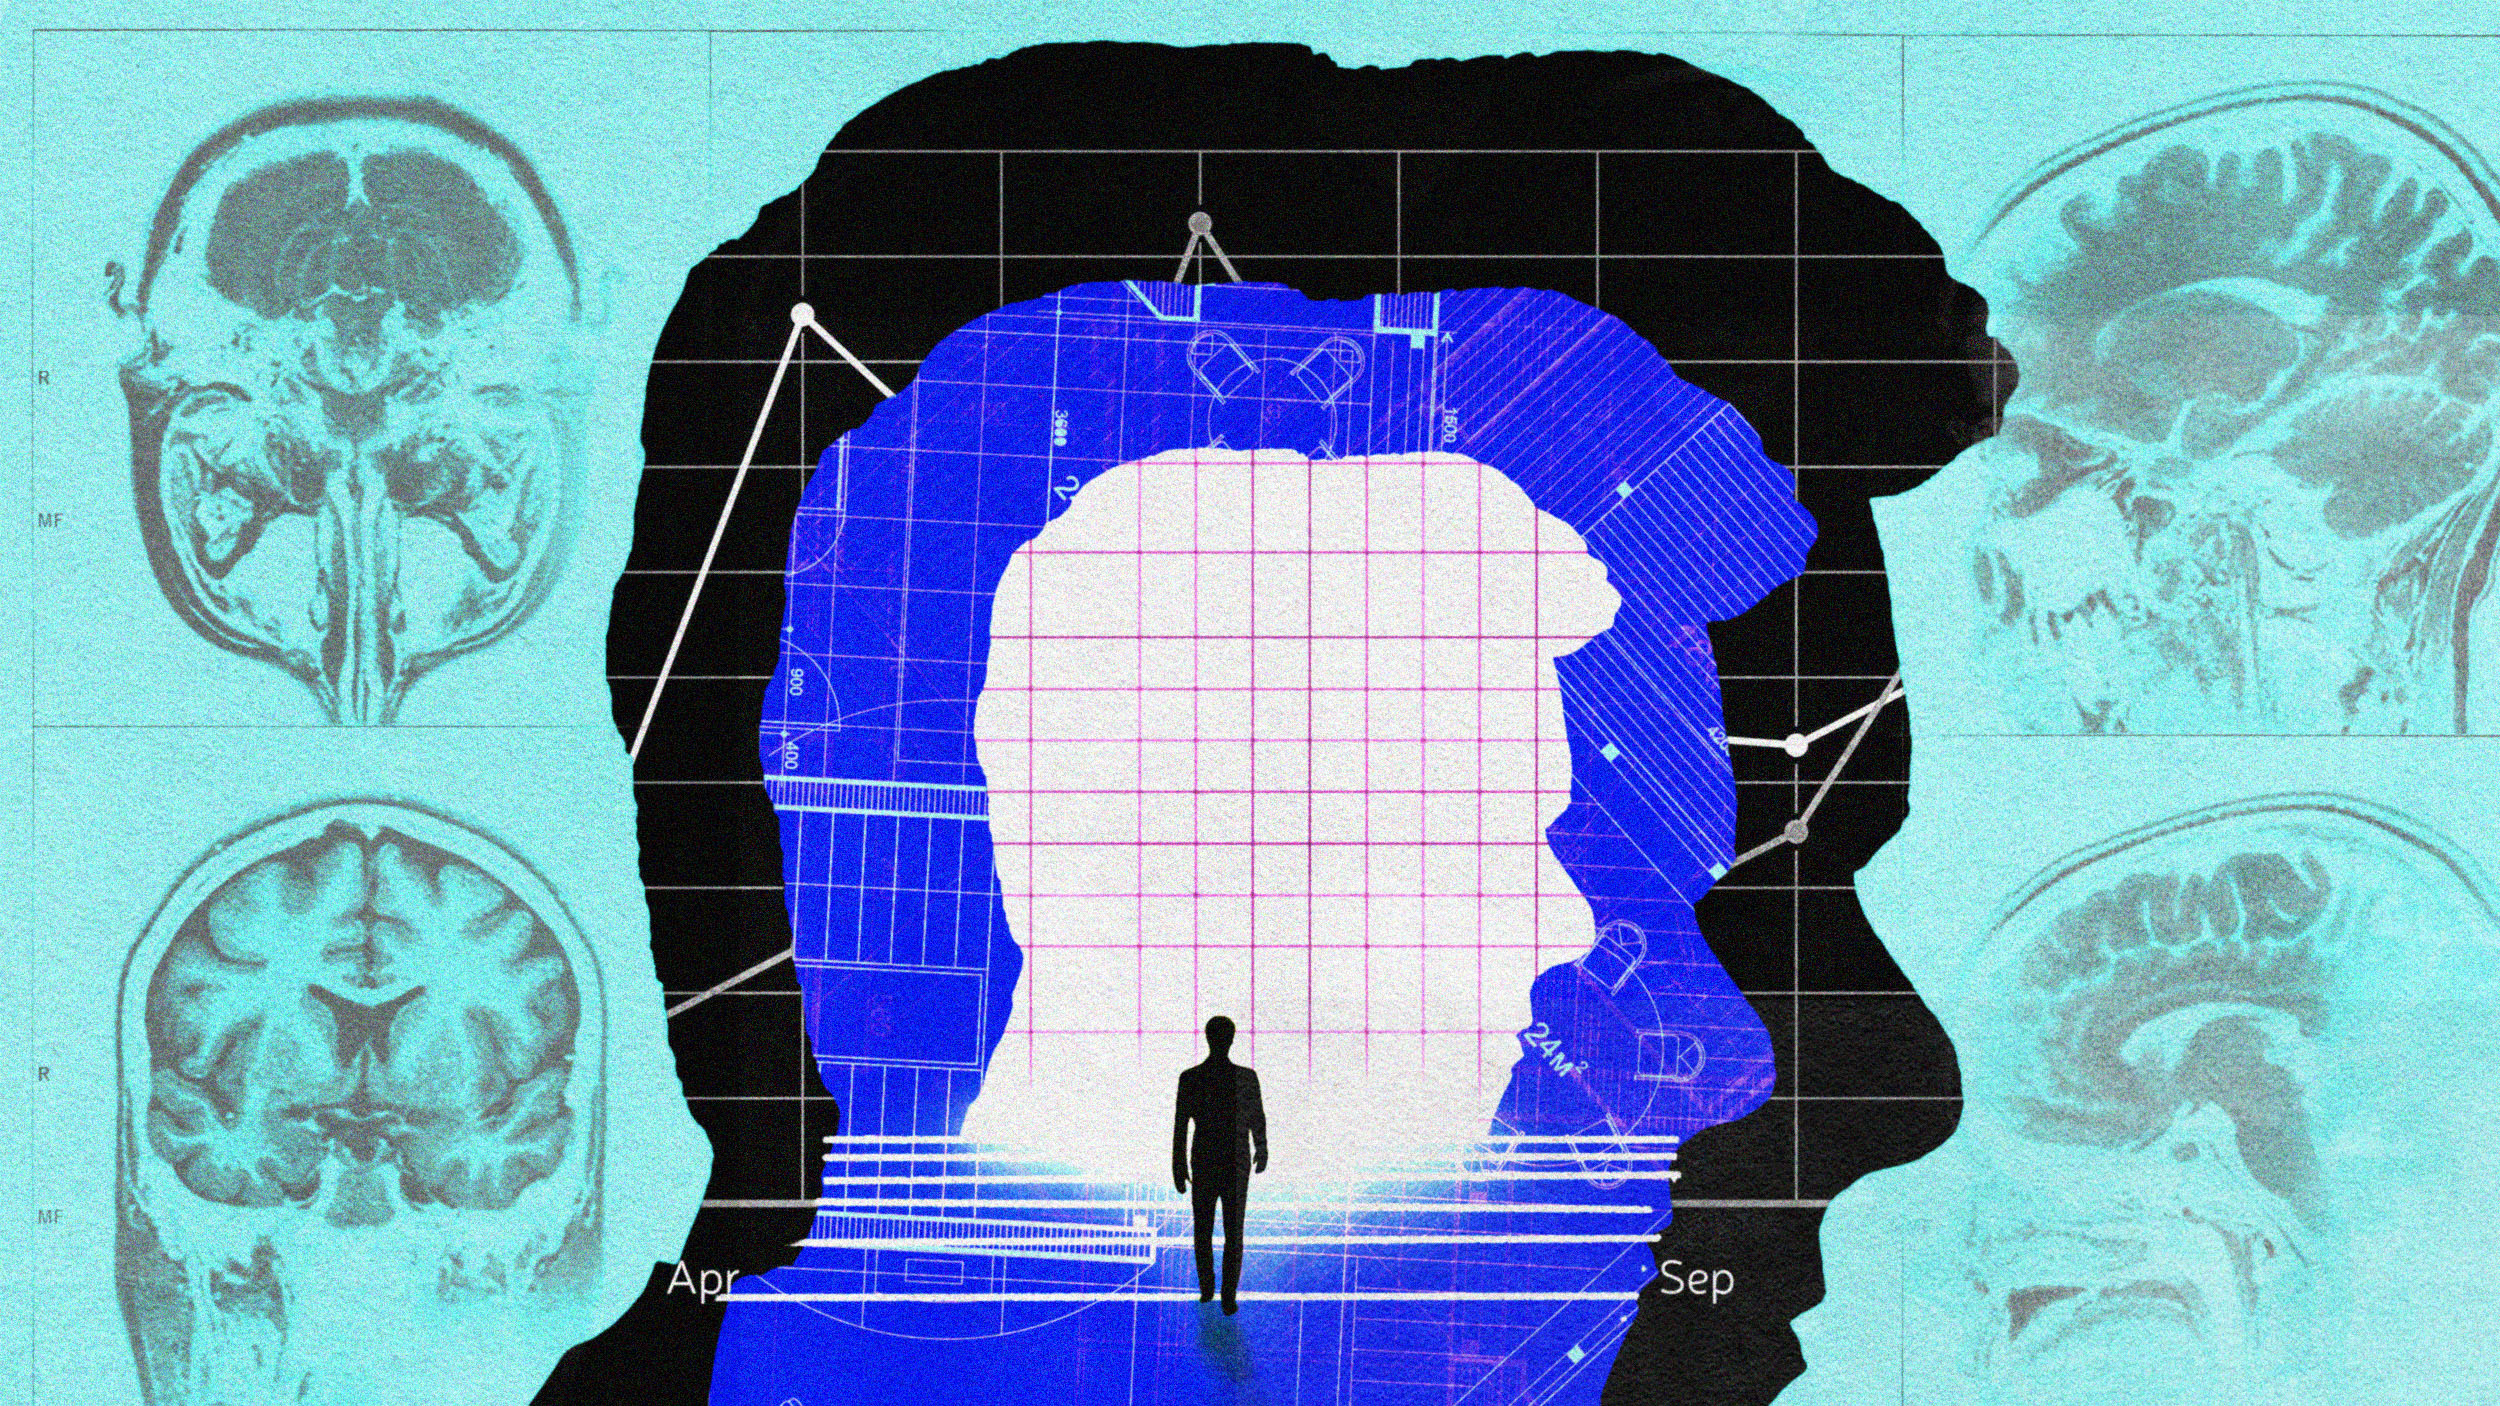 Abstract image featuring a human silhouette filled with various medical and neural diagrams, with brain scan images in the background. A small figure is walking towards the center, symbolizing the long game.